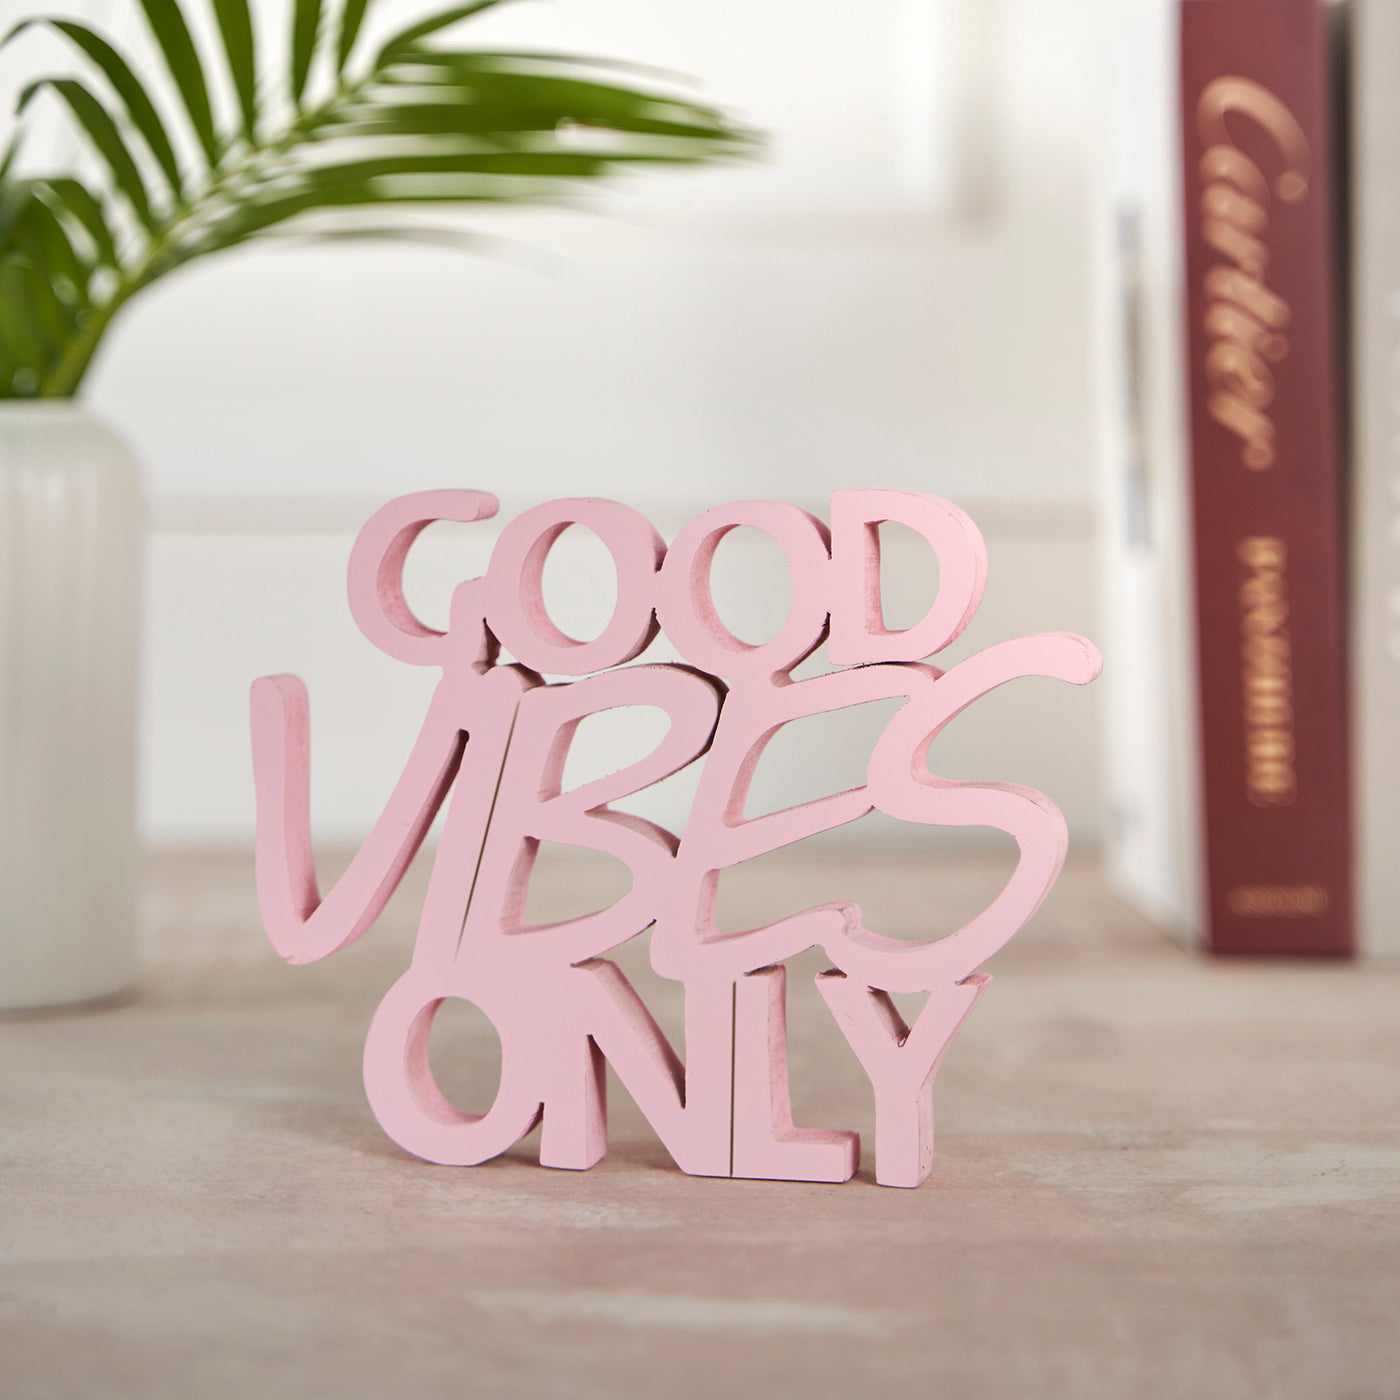 Table Top , Office Table Decorative -Good Vibes Only